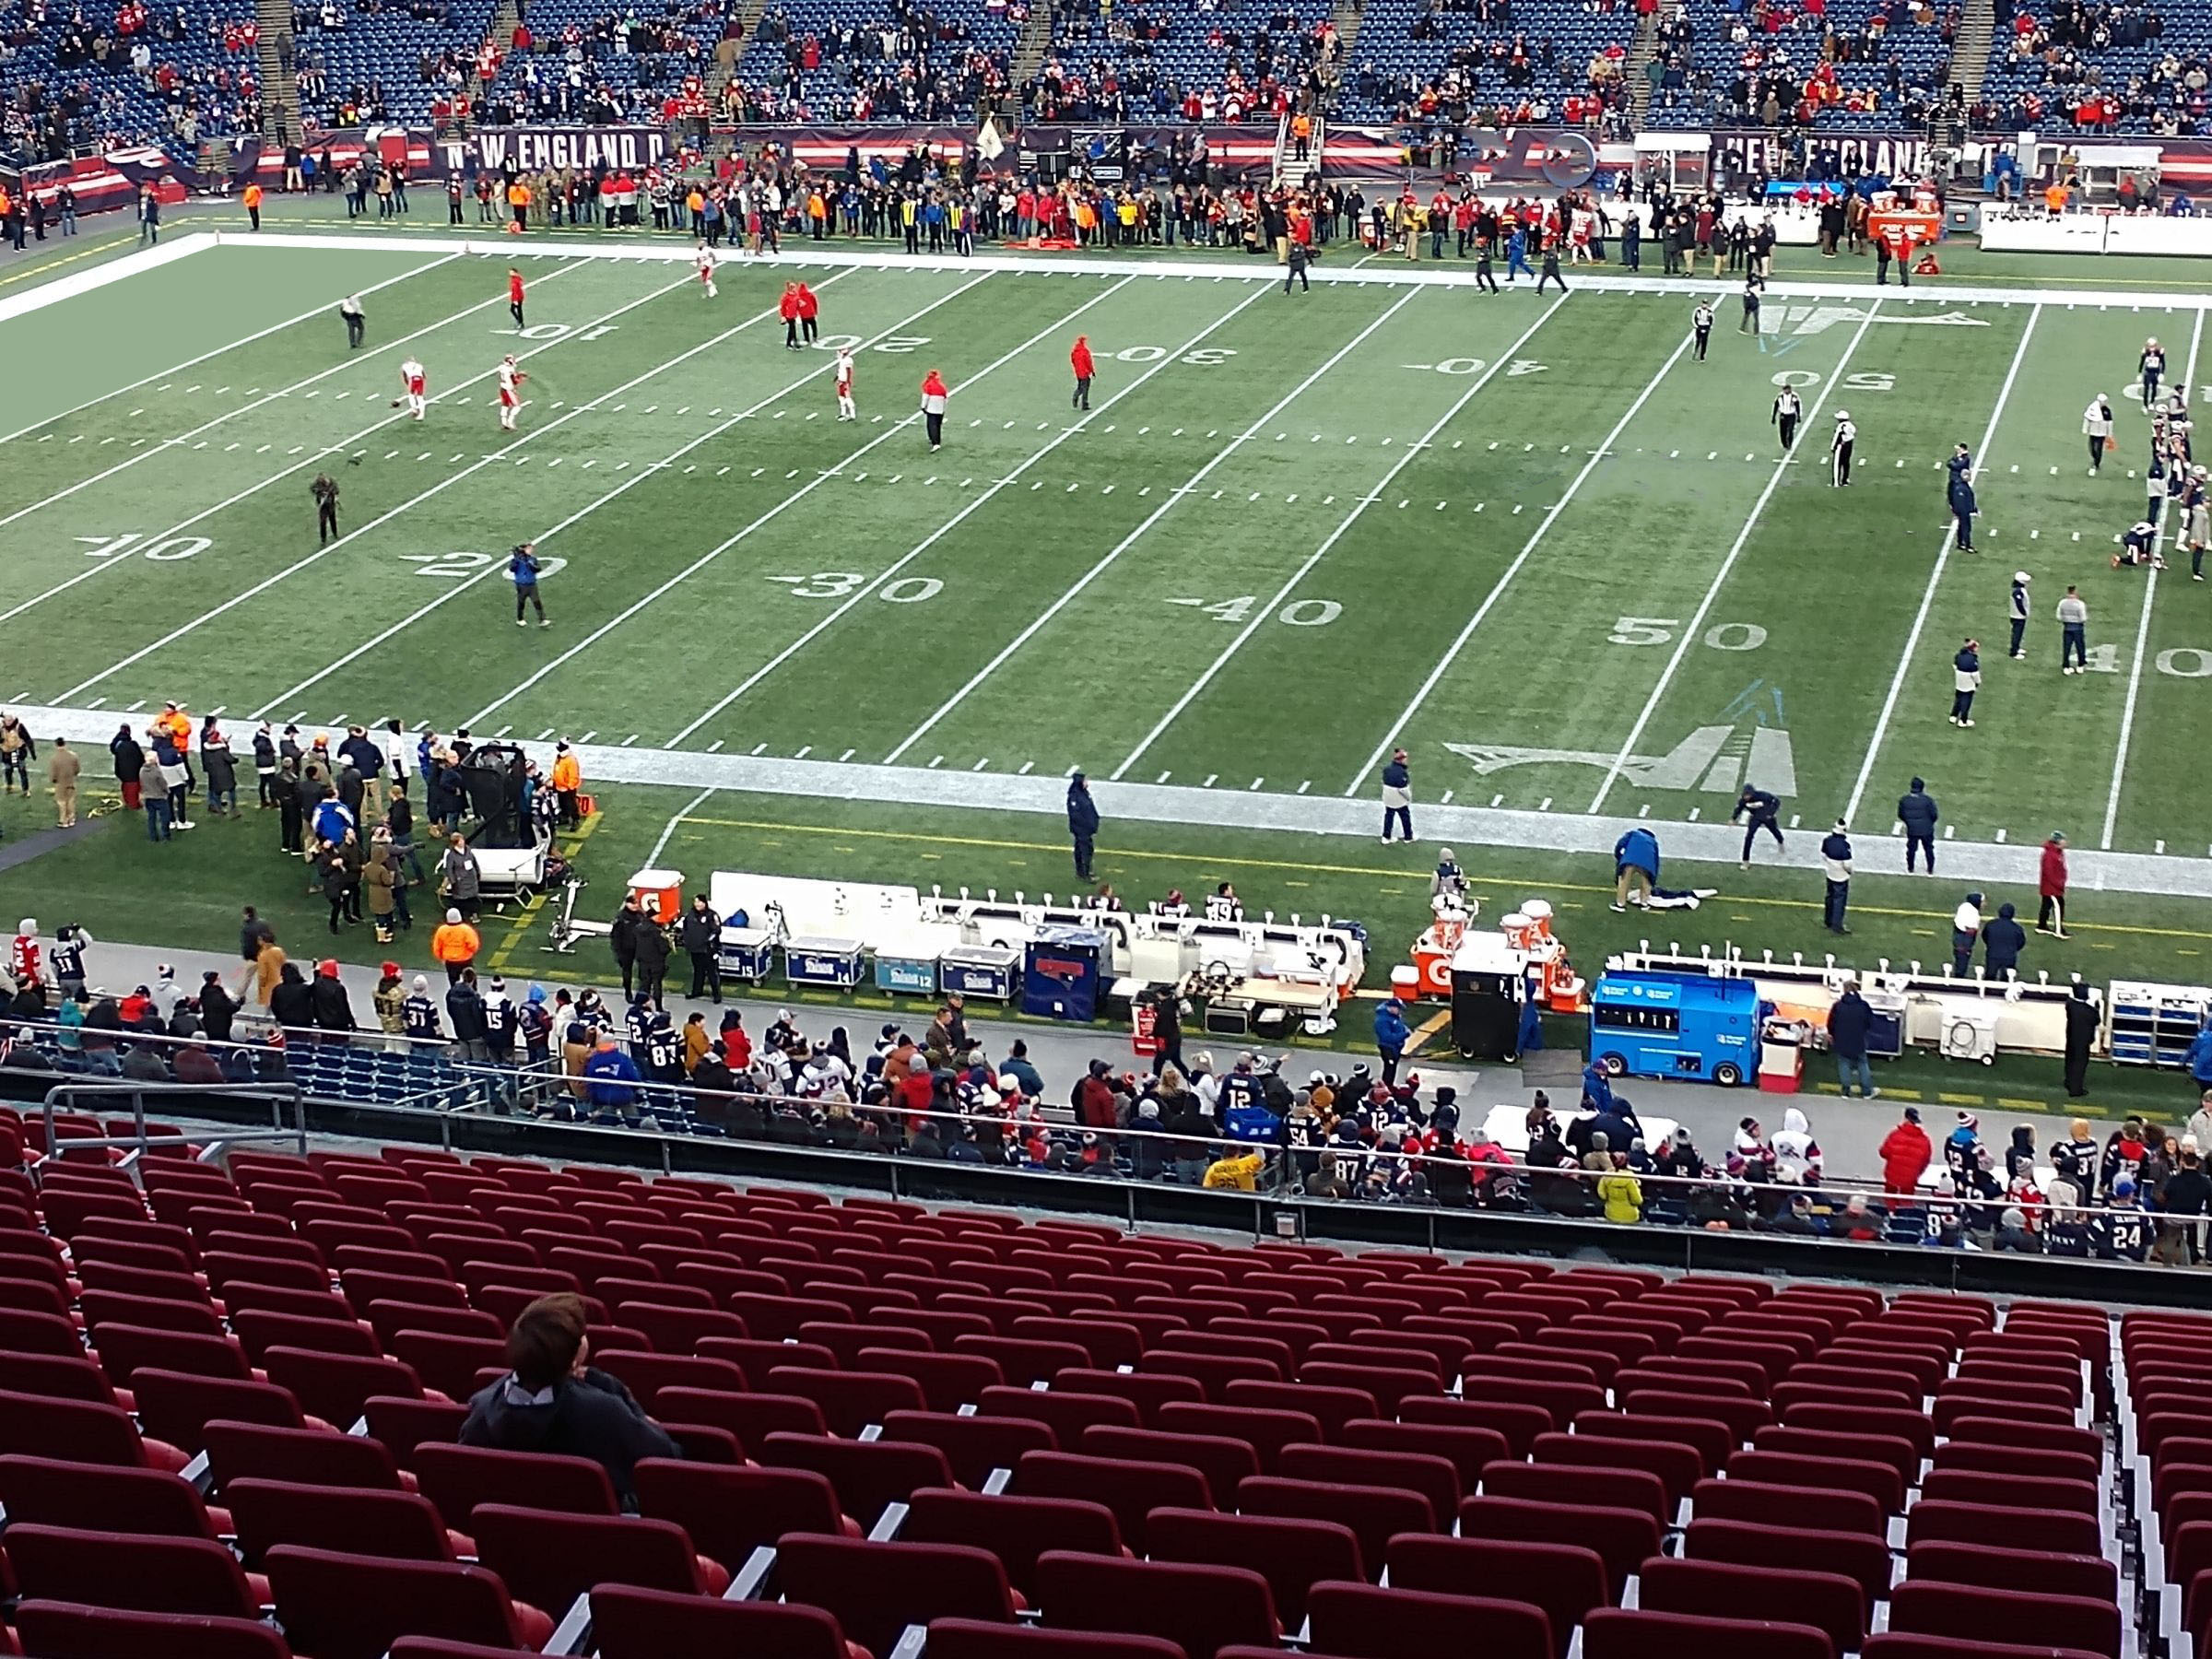 section cl9, row 14 seat view  for football - gillette stadium